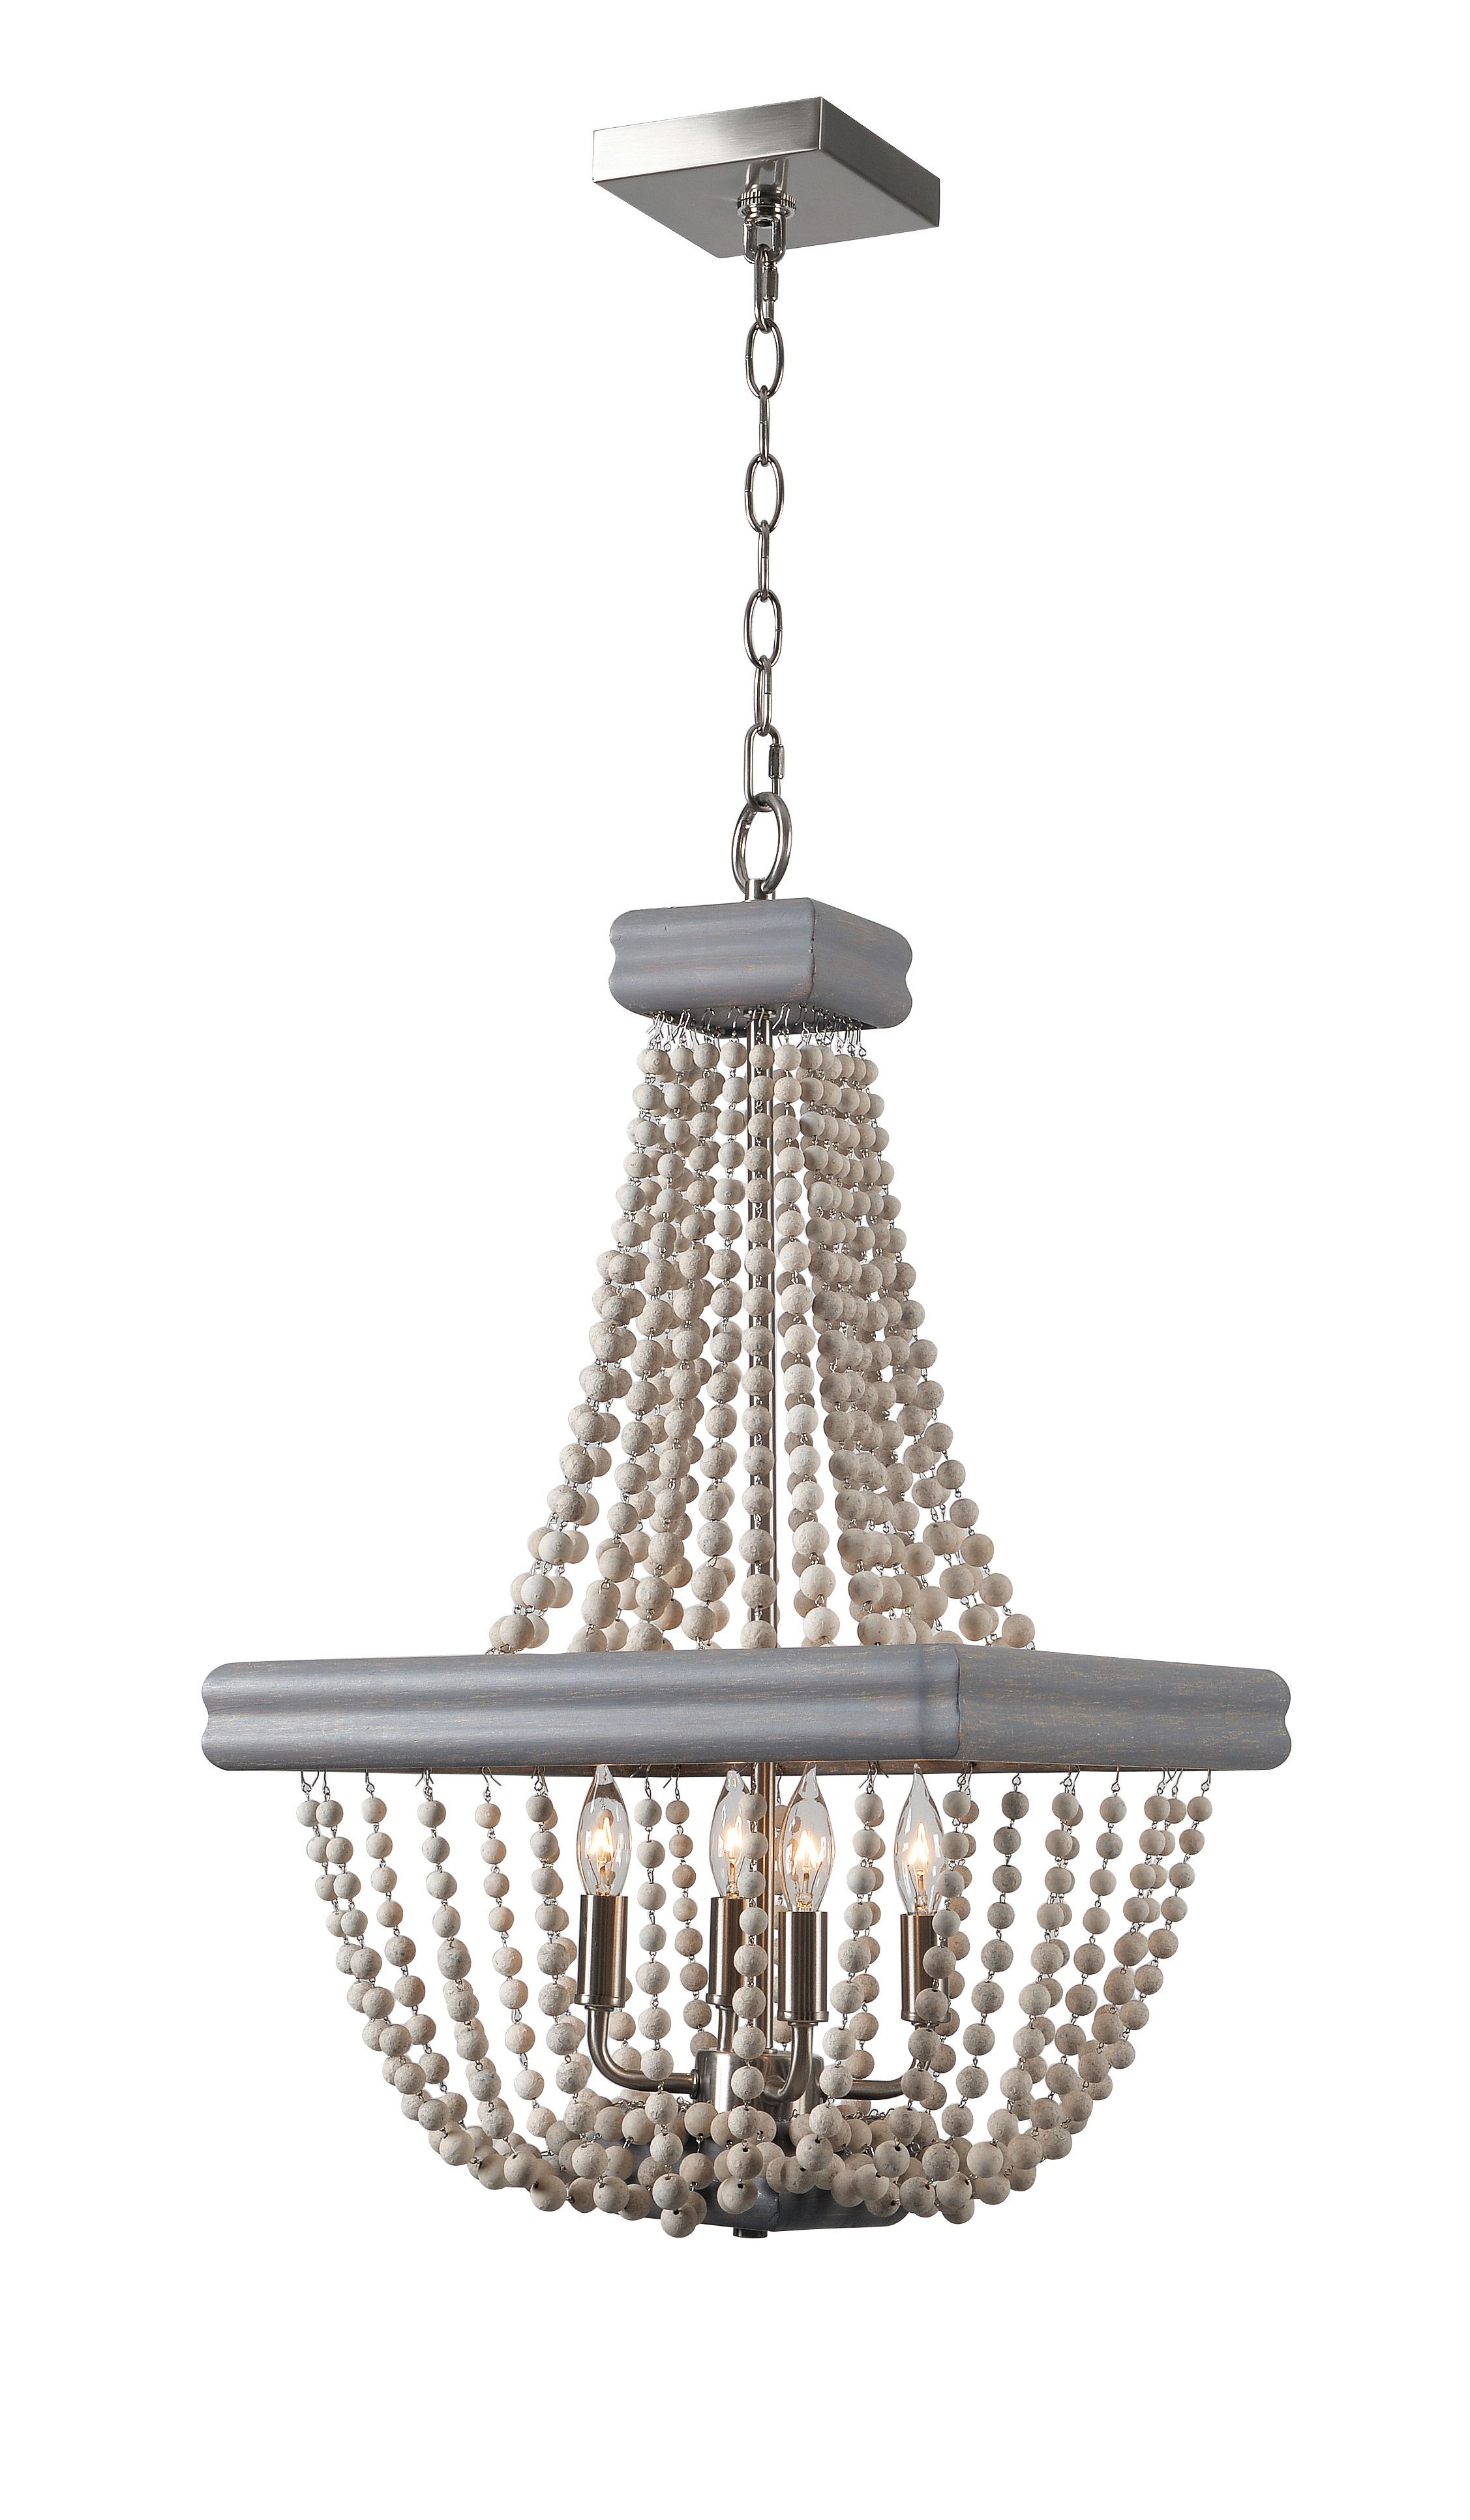 4 Light Empire Chandelier Throughout Ladonna 5 Light Novelty Chandeliers (View 11 of 30)